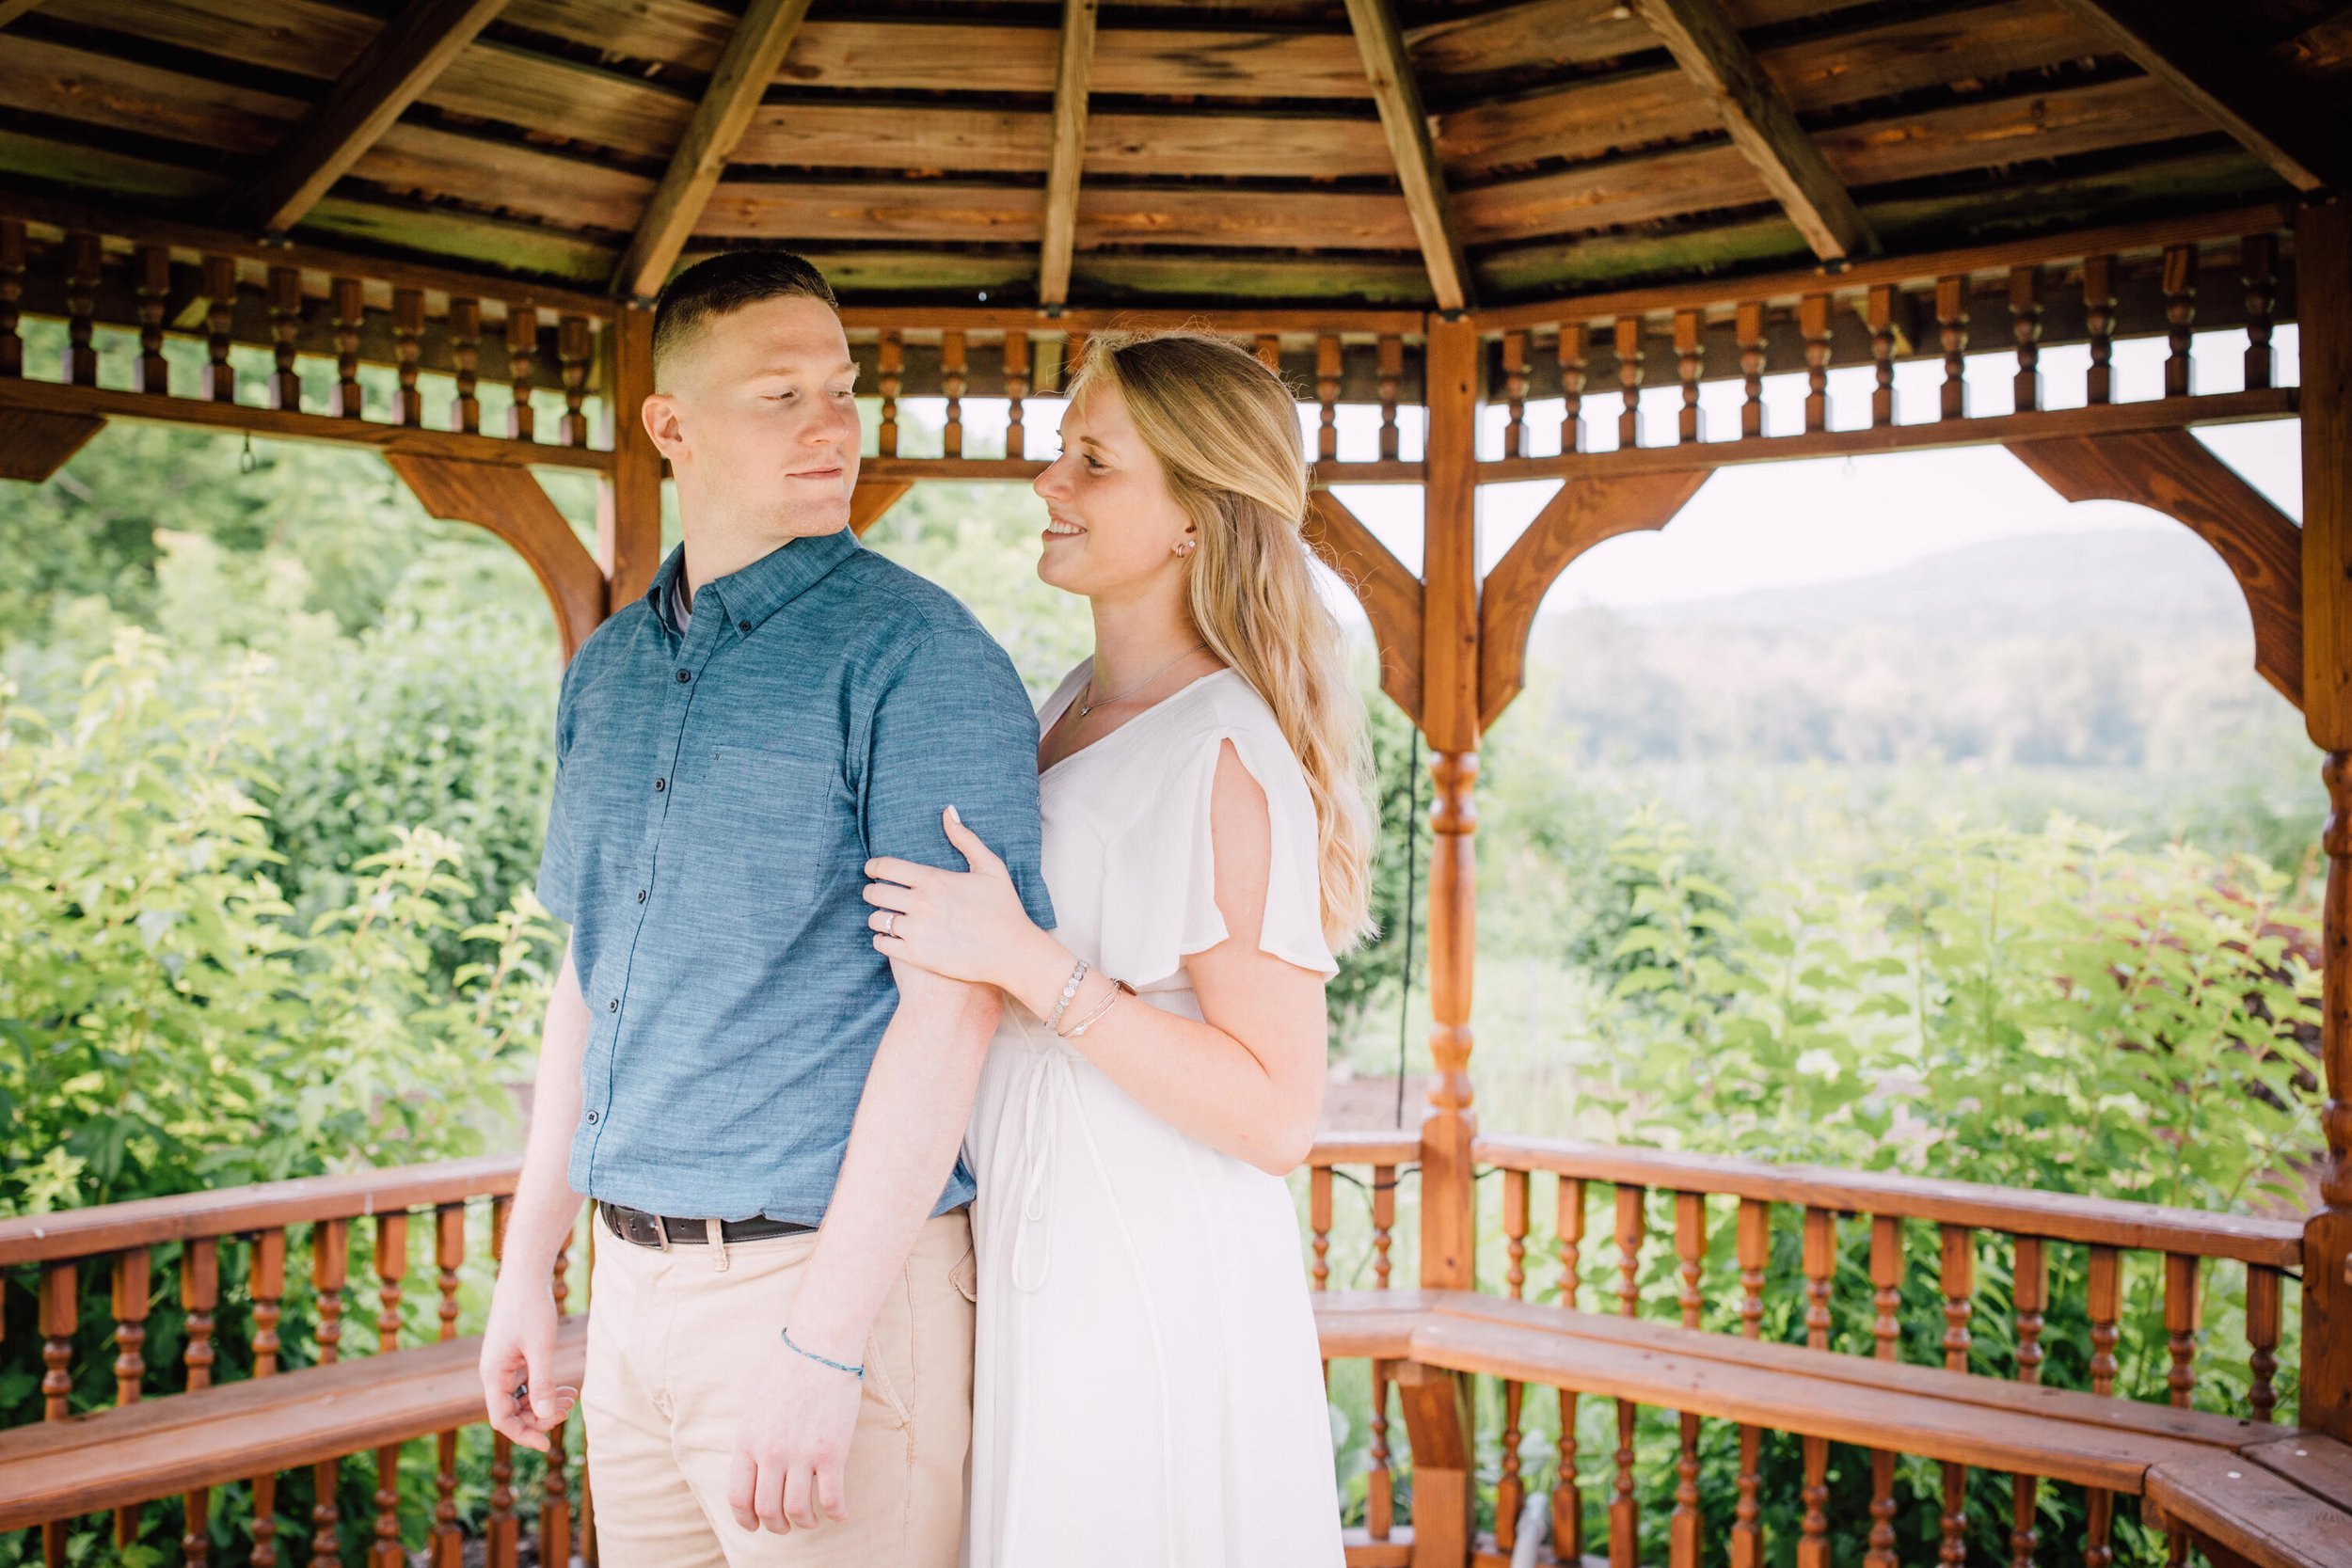  Jake looks back and smiles at his fiancé under a gazebo at rocking horse farm 